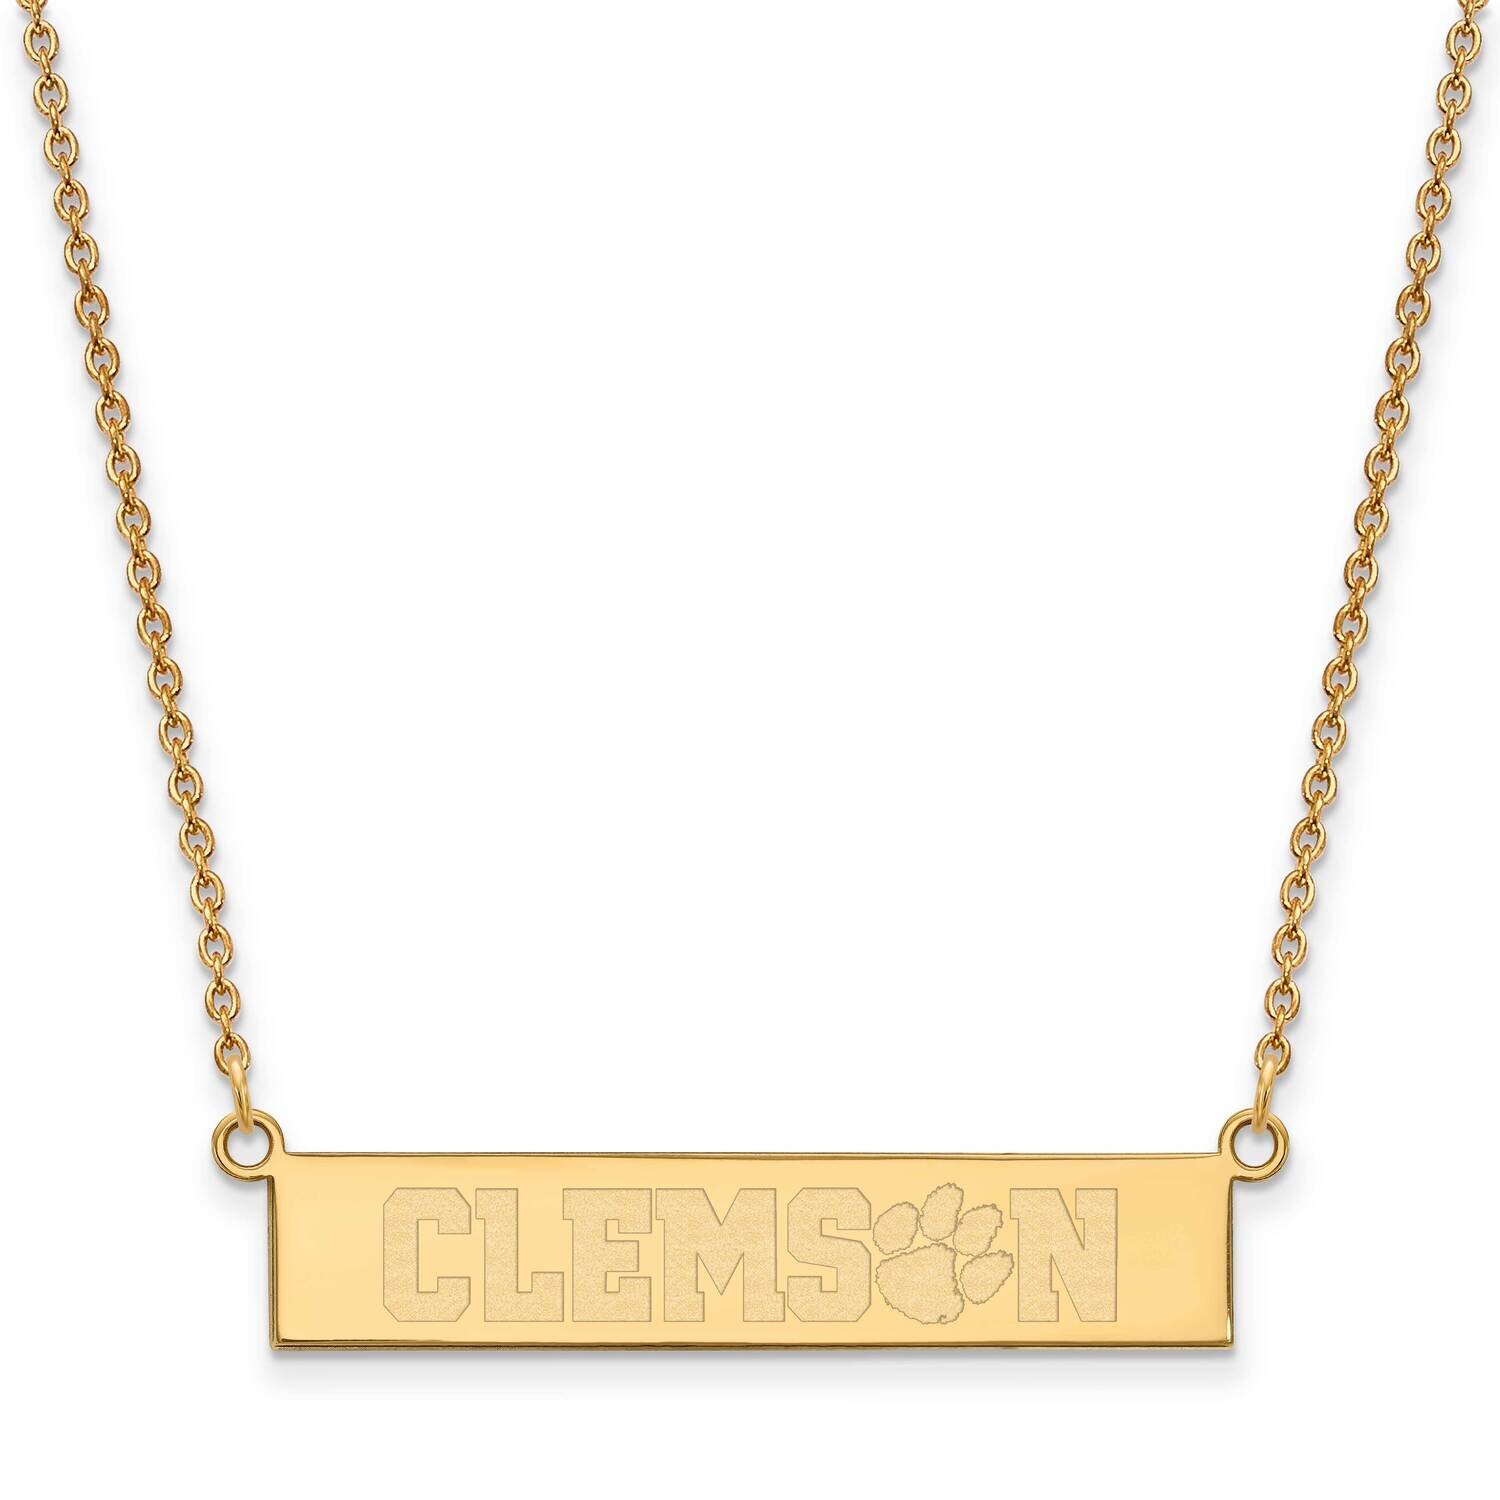 Clemson University Small Bar Necklace Gold-plated Sterling Silver GP049CU-18